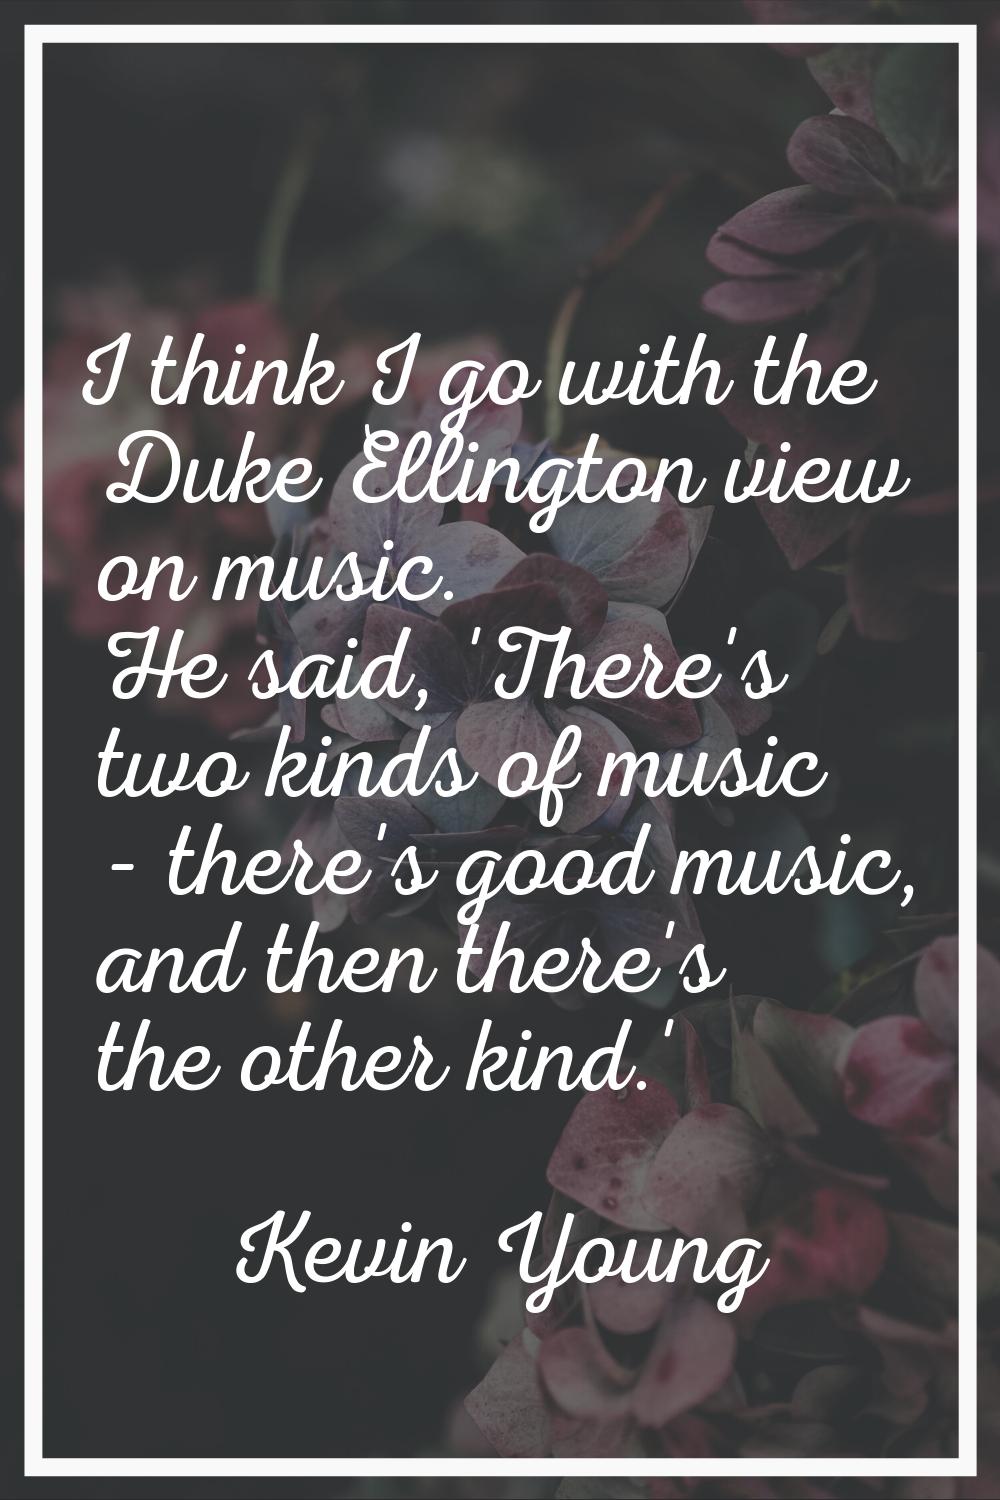 I think I go with the Duke Ellington view on music. He said, 'There's two kinds of music - there's 